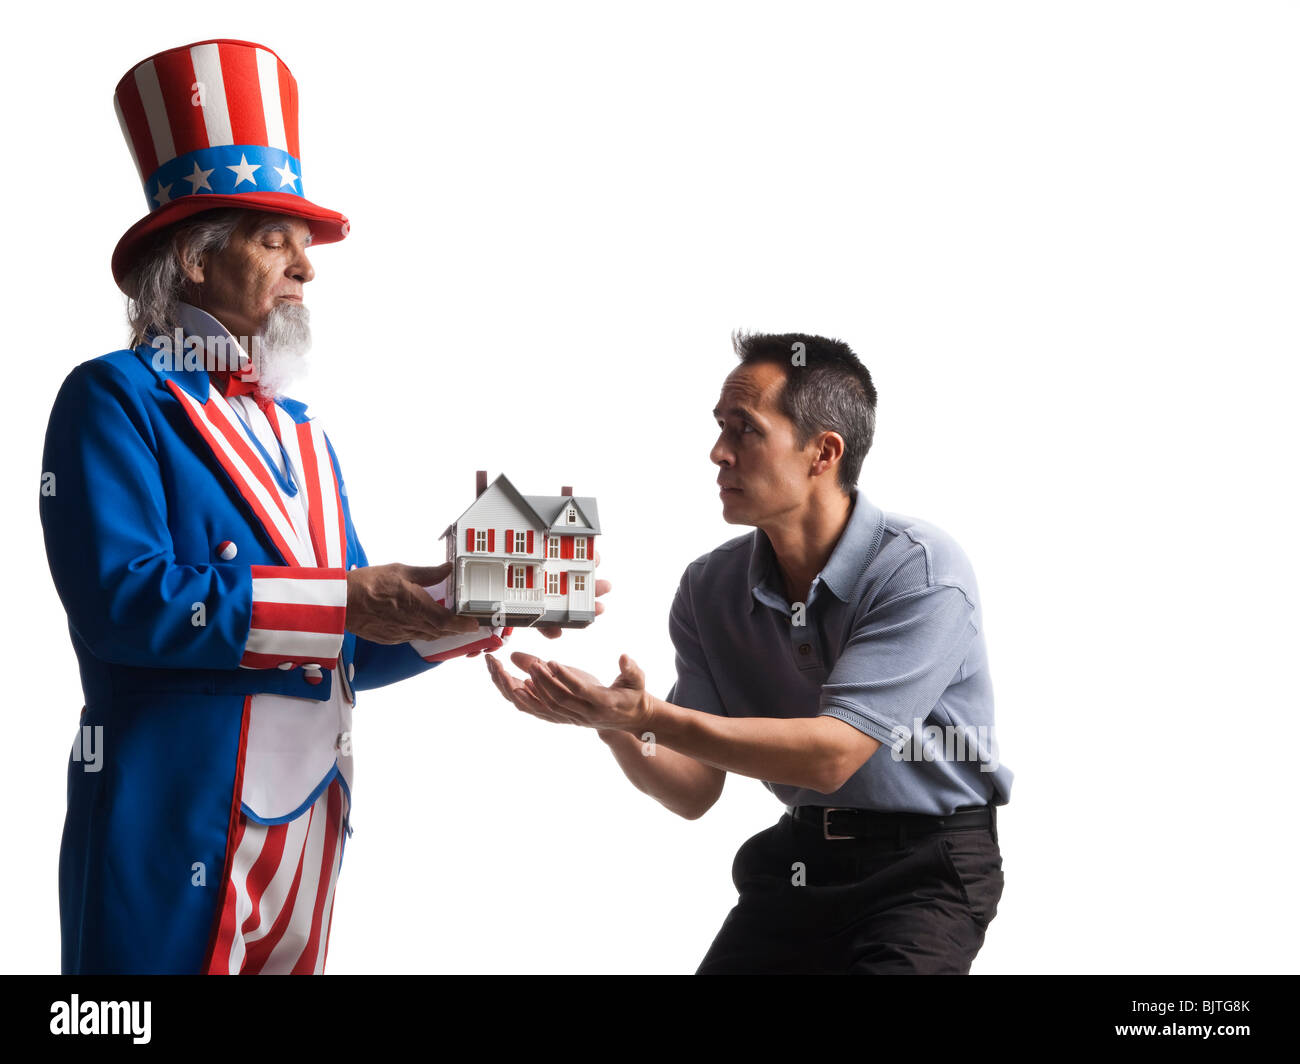 Man in Uncle Sam's costume giving model of house to other man, studio shot Stock Photo